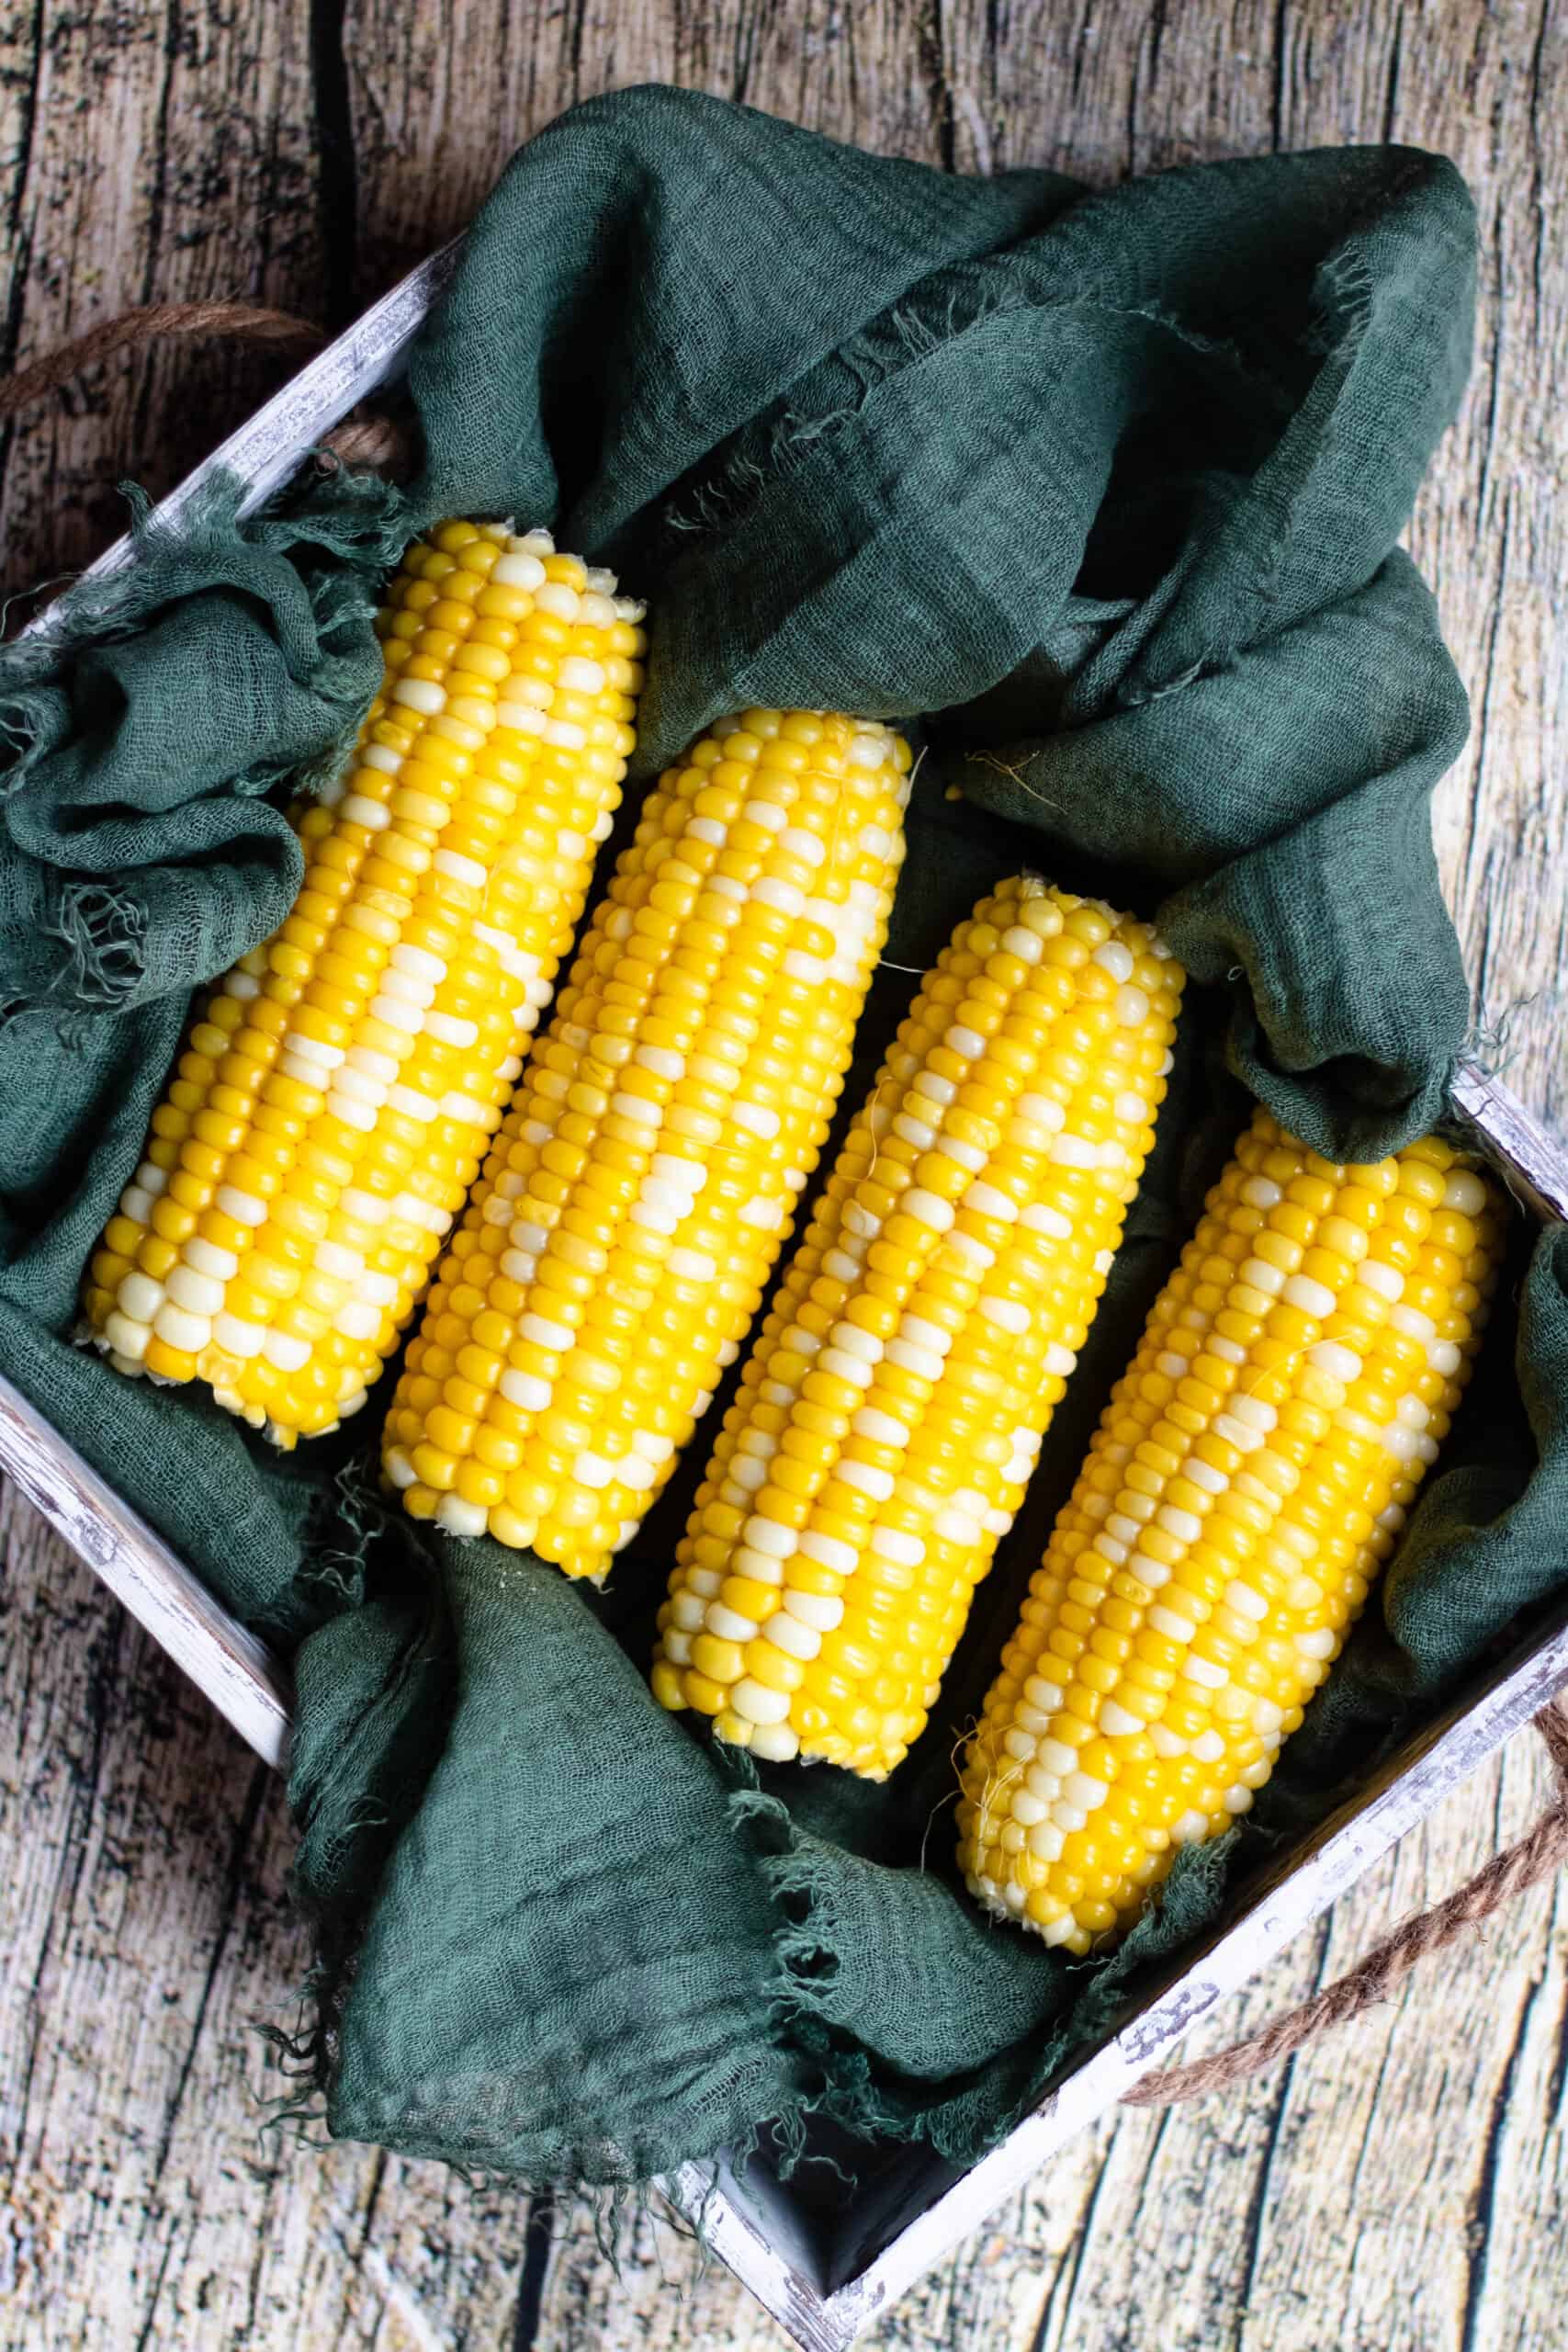 Corn on the Cob in a basket